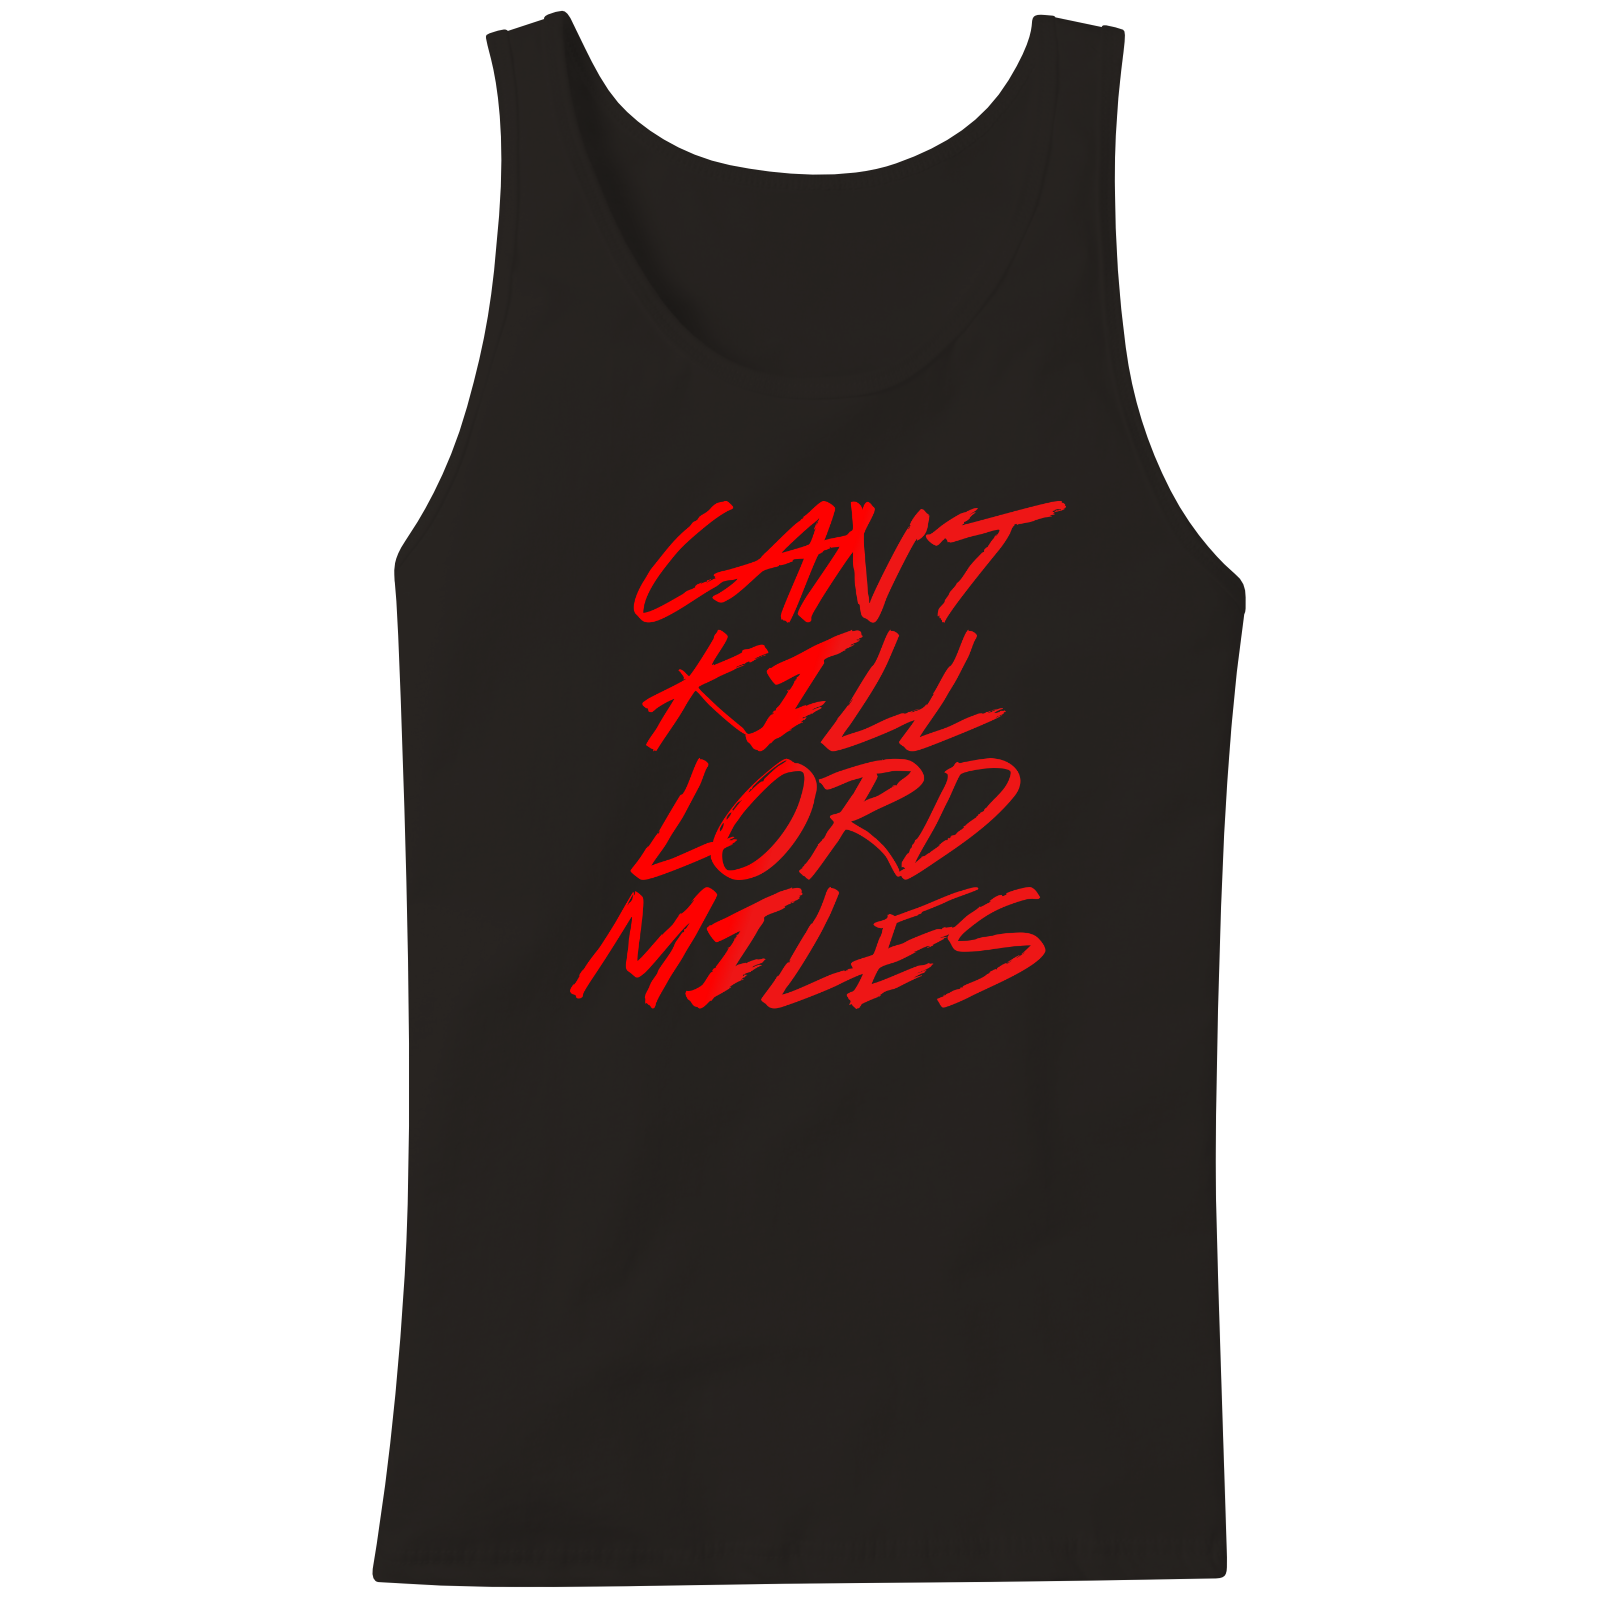 Cant Kill Lord Miles (Red) Tanktop